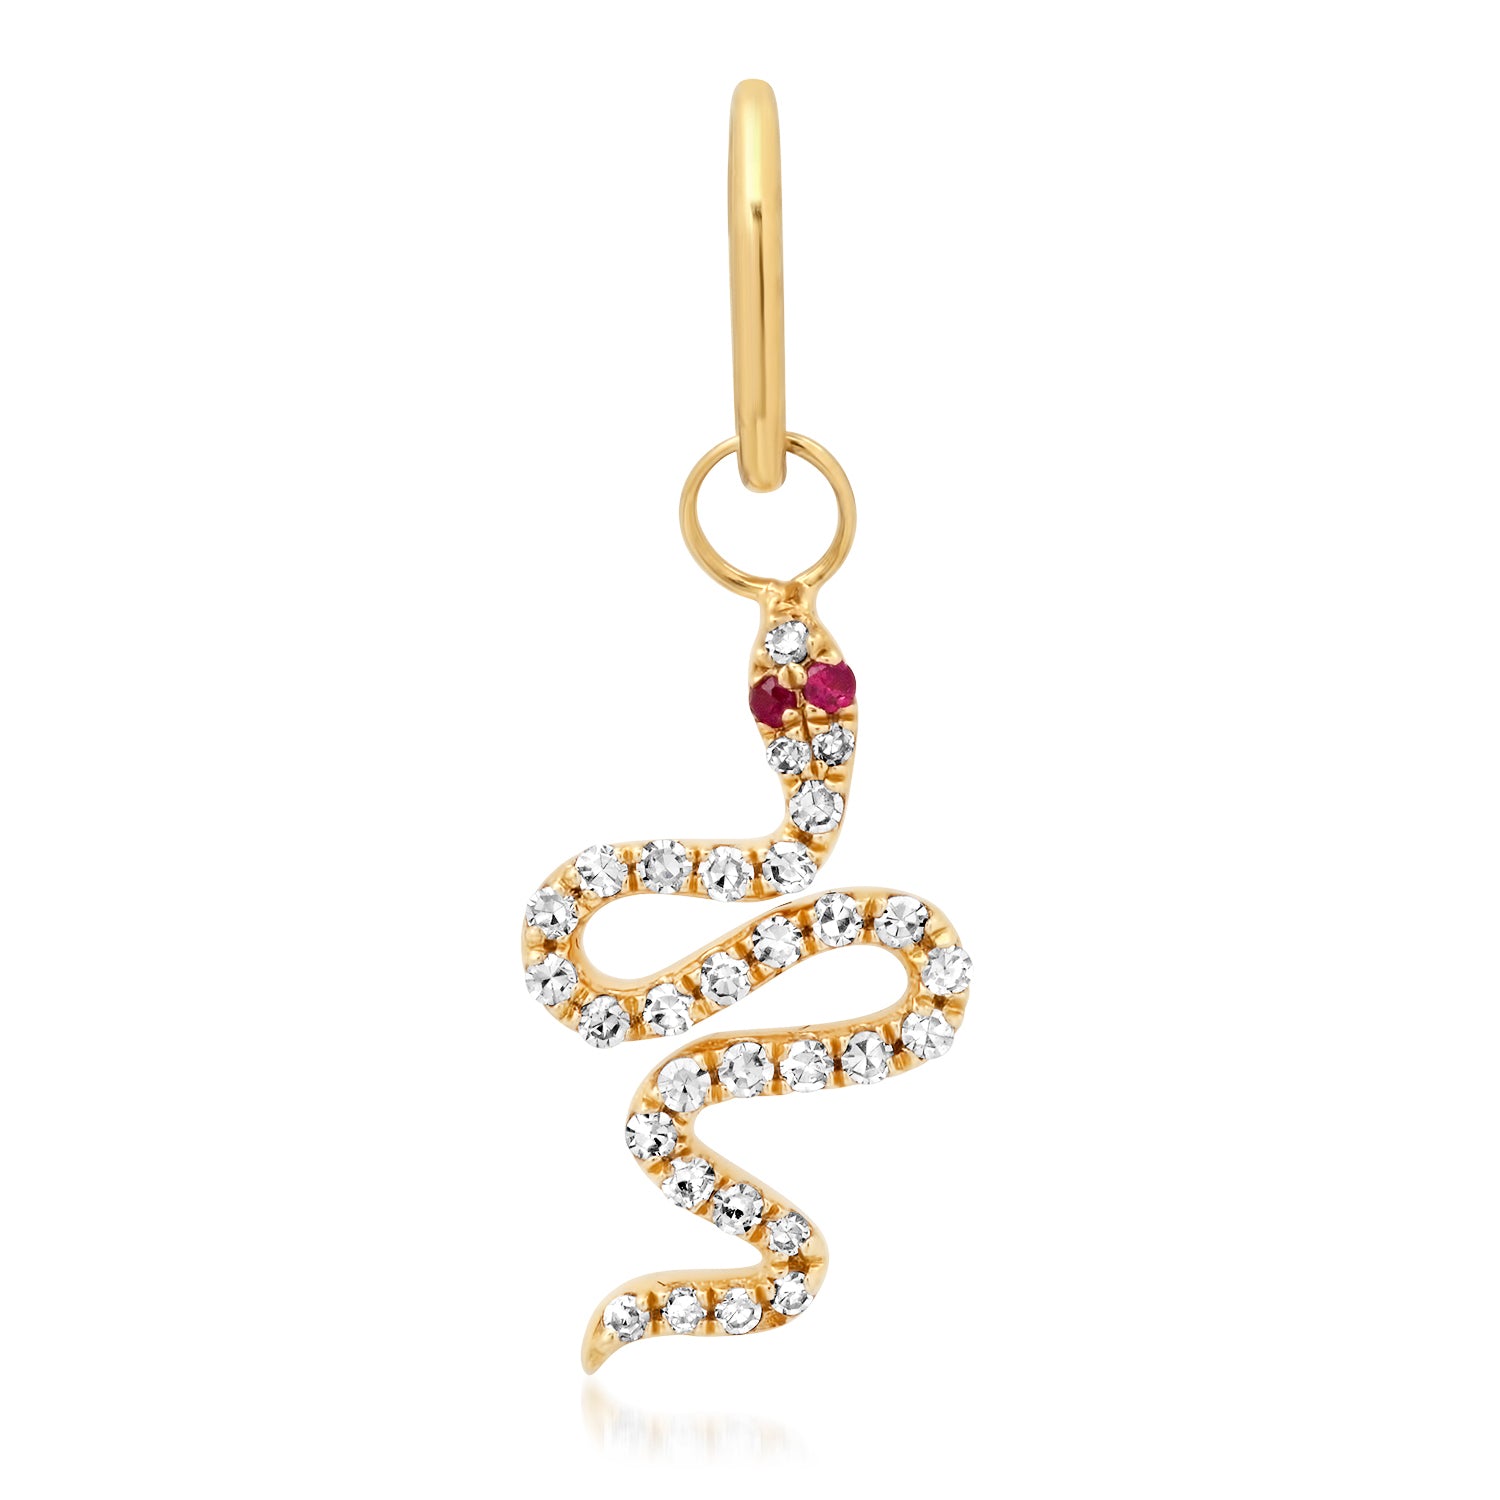 Diamond and Ruby Slither Snake charm